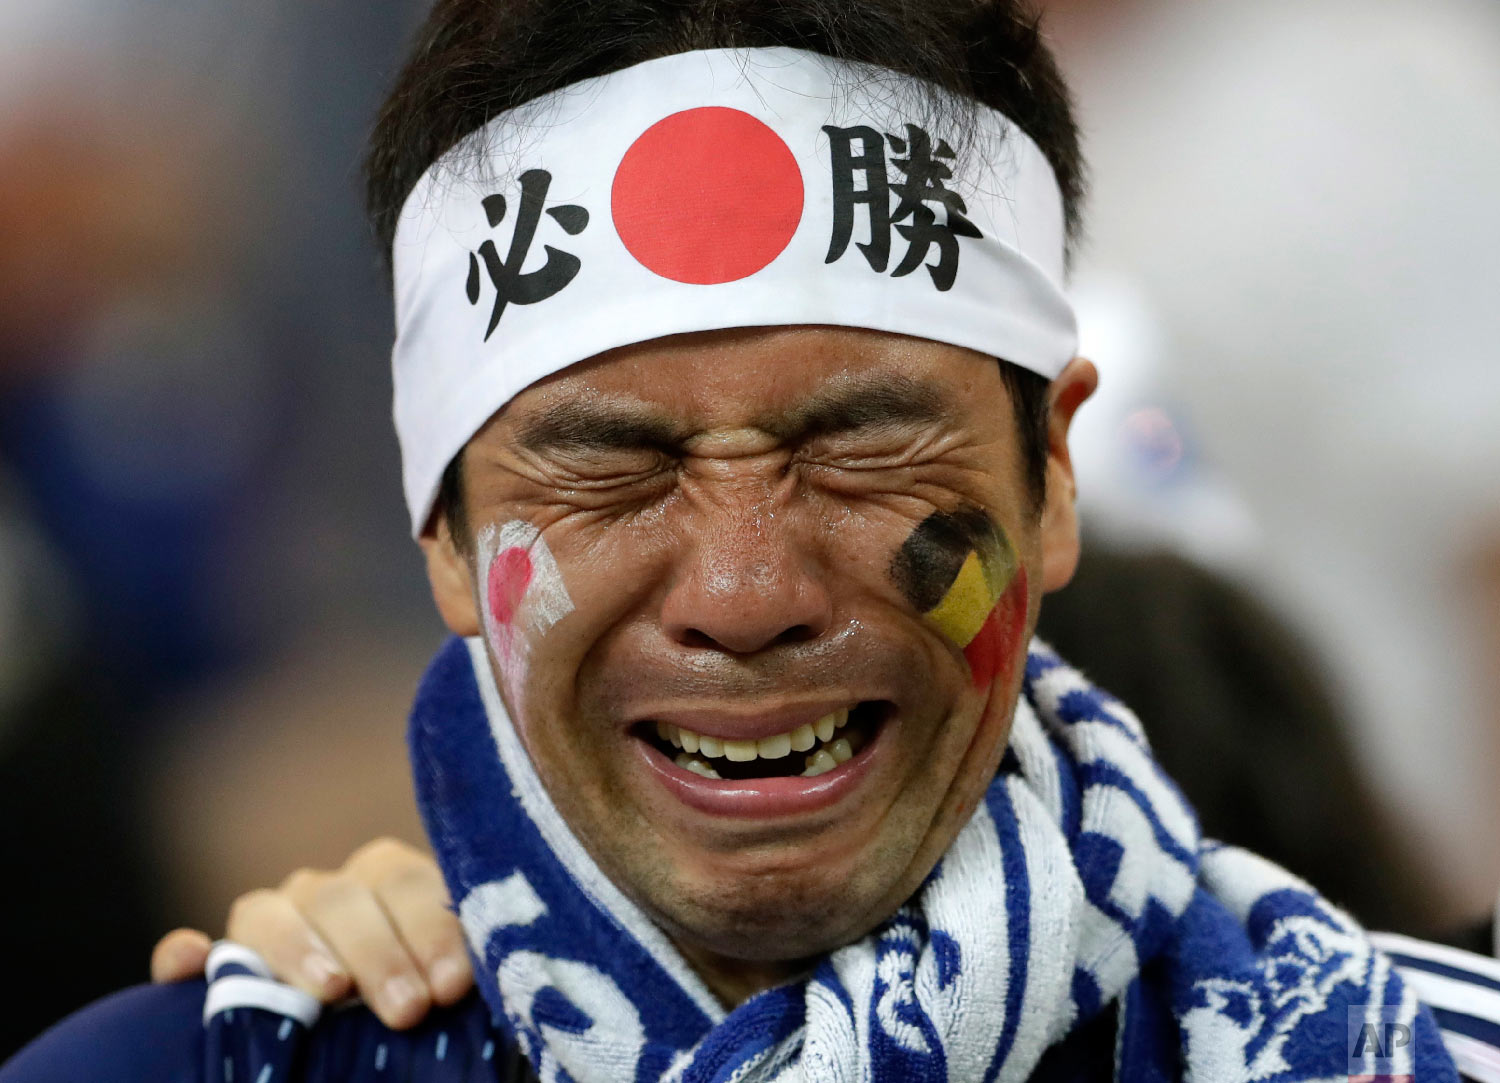  A Japan supporter cries after losing the round of 16 match between Belgium and Japan at the 2018 soccer World Cup in the Rostov Arena, in Rostov-on-Don, Russia, Monday, July 2, 2018. (AP Photo/Petr David Josek) 